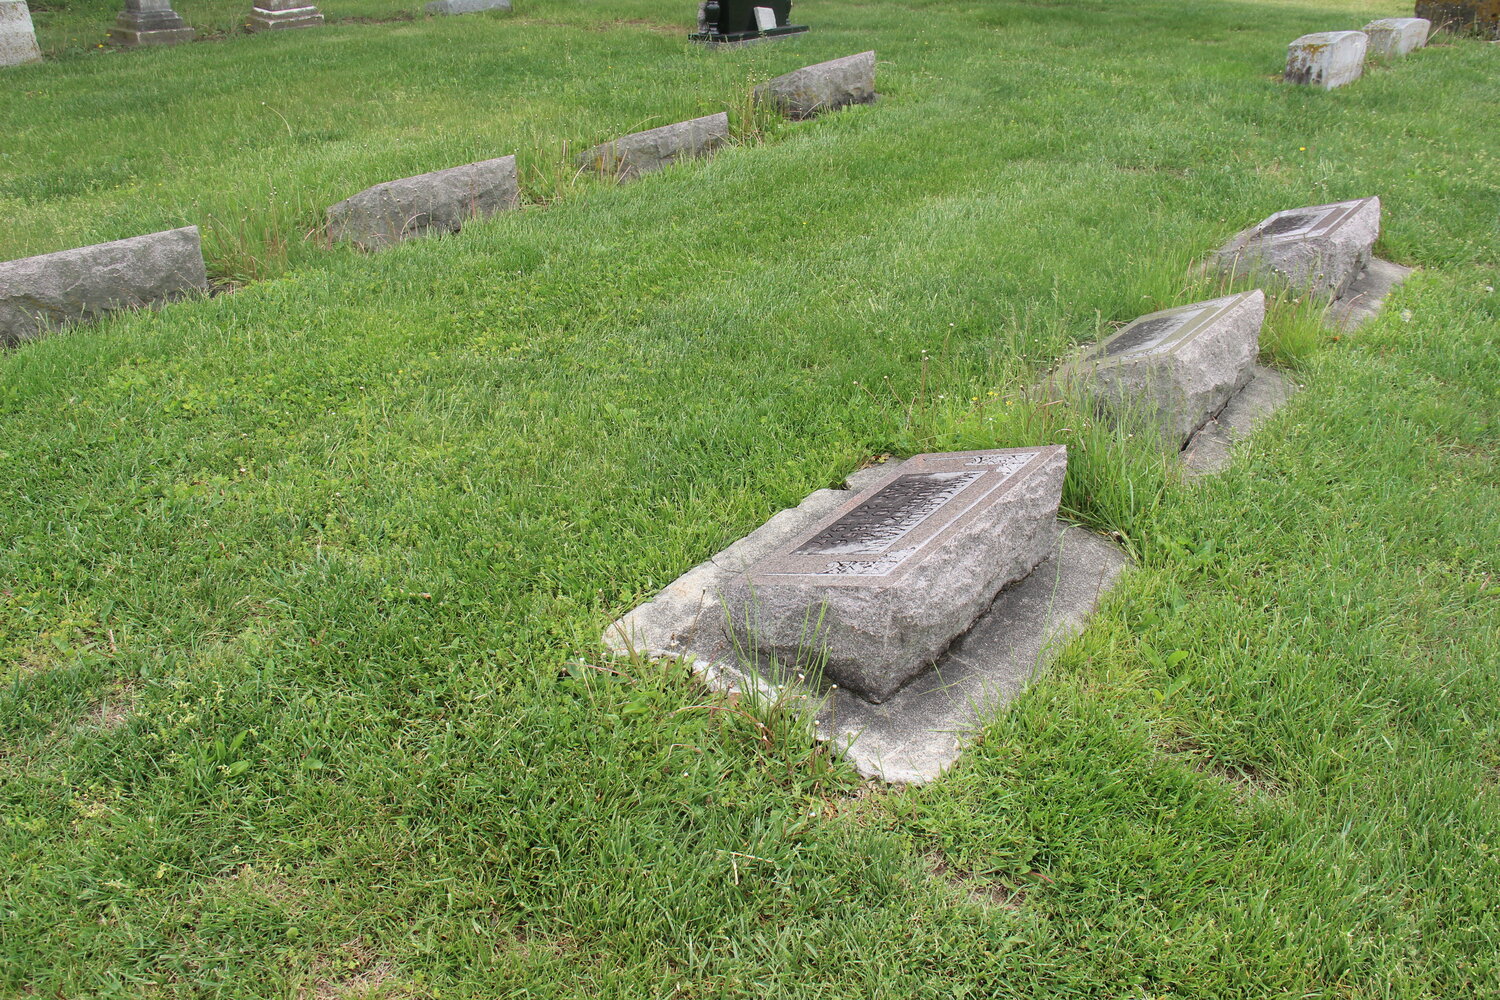 Some stones at the cemetery already have the wider base. The city is requiring the new 4-inch bases to help prevent damage to stones during mowing and weed eating.